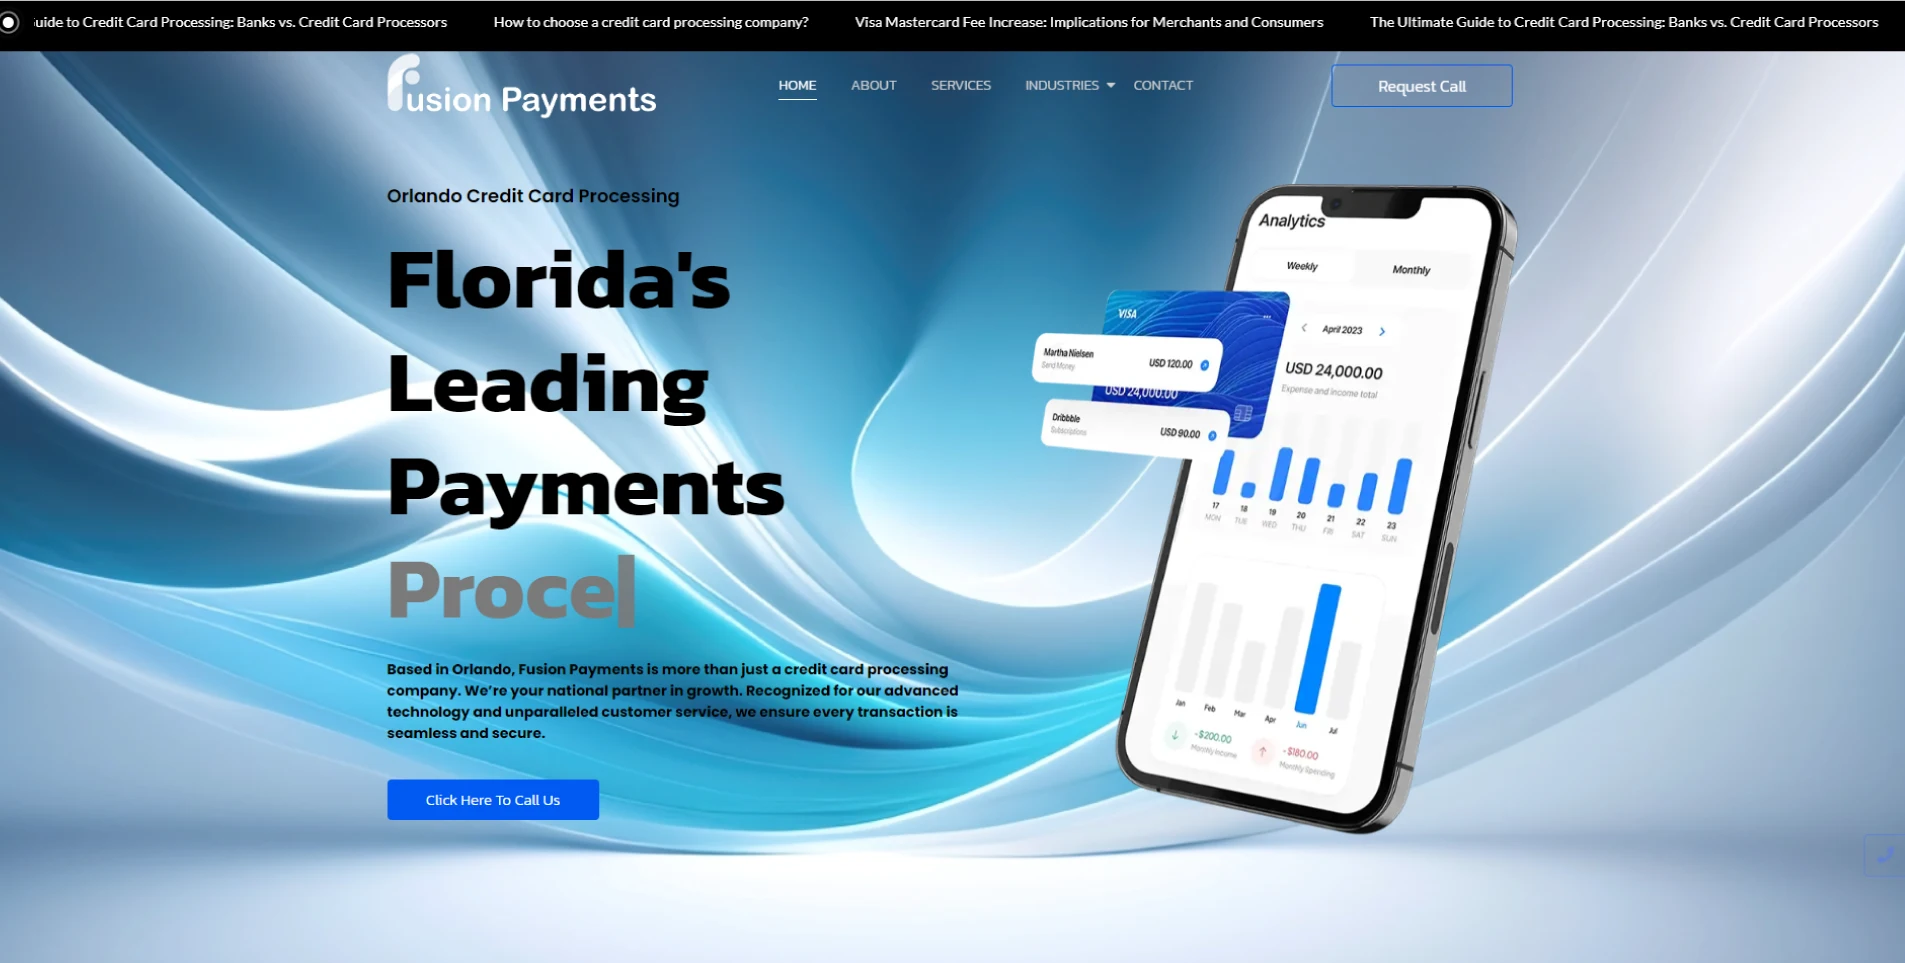 Fusion Payments website interface highlighting credit card processing web design.